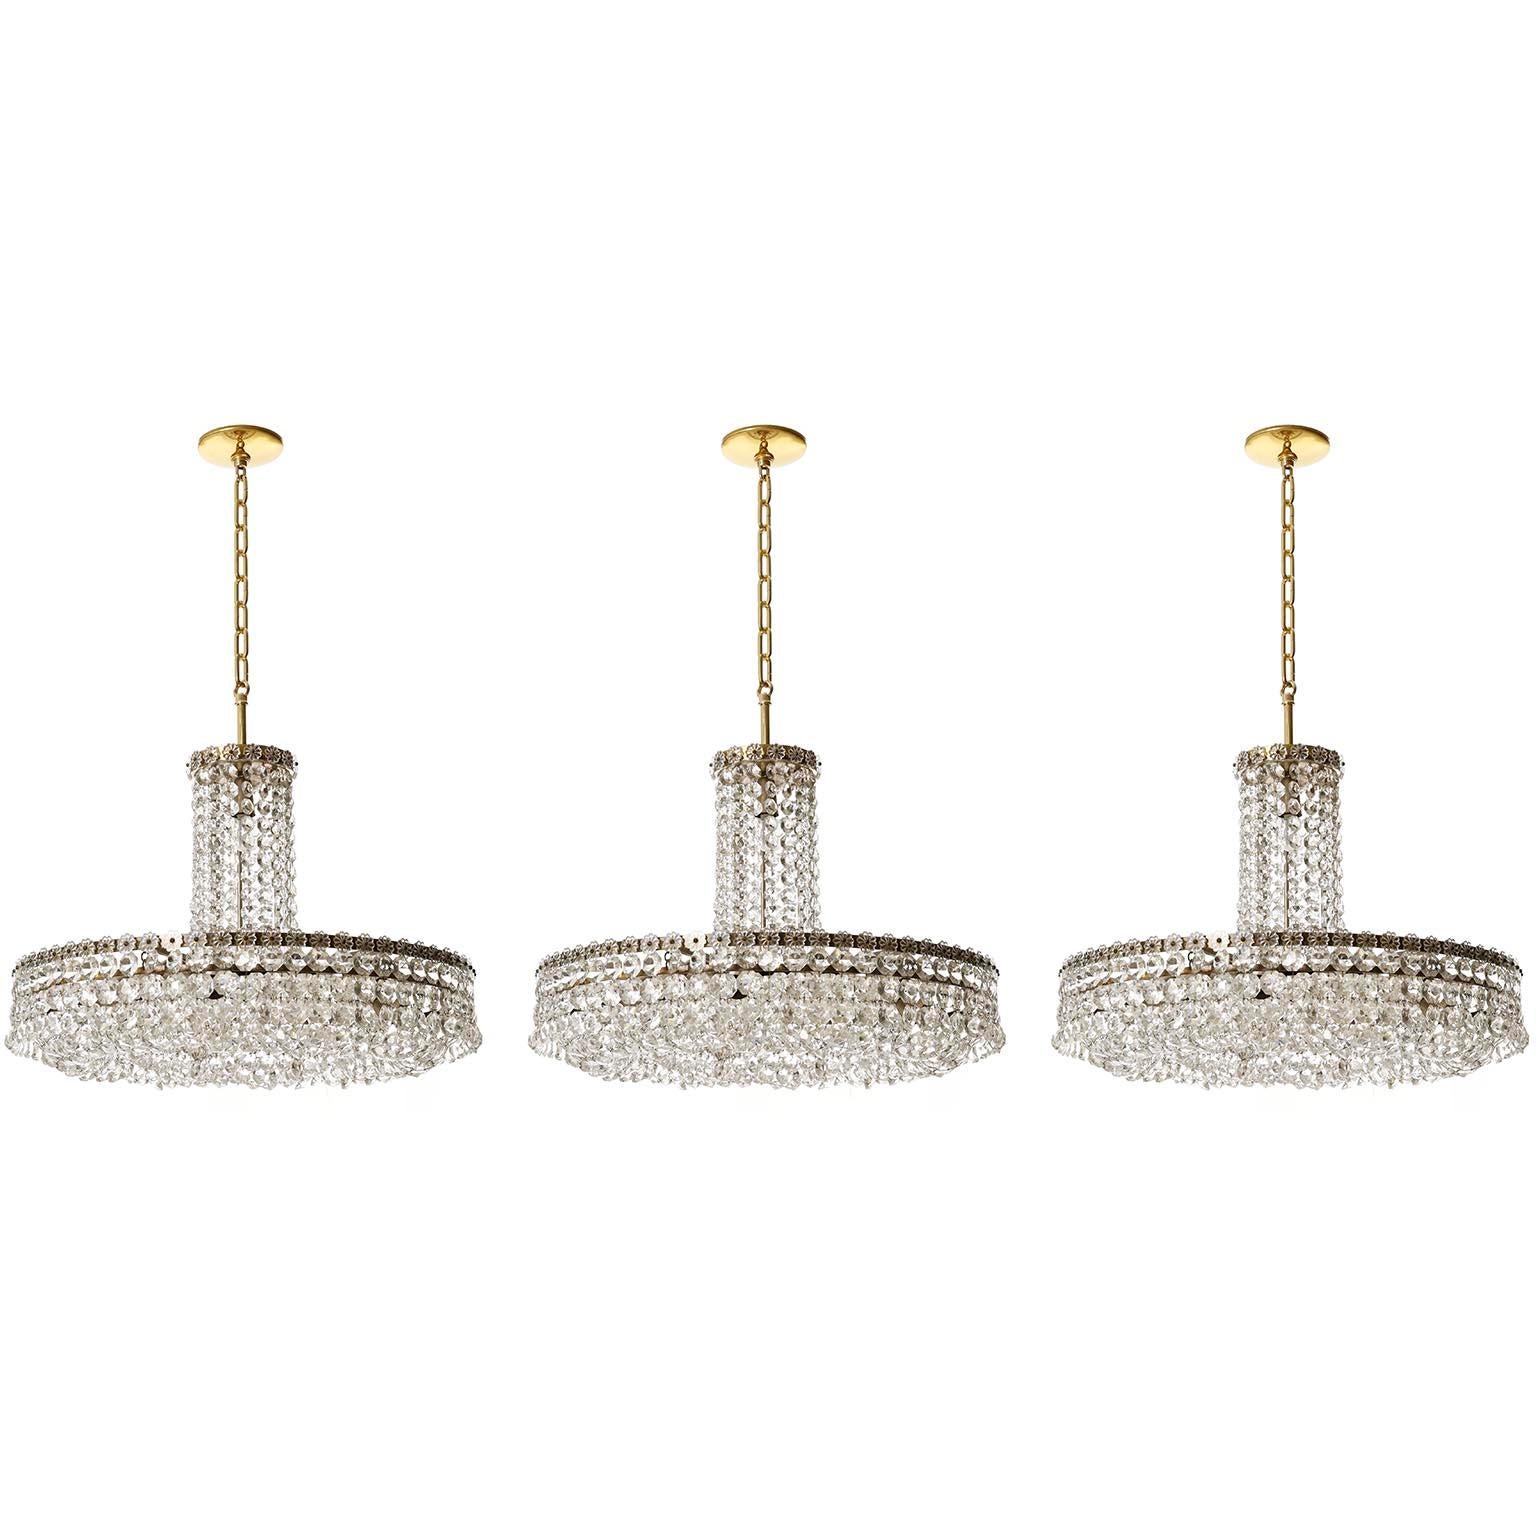 One of three impressive chandeliers, pendant lights model no. 3330 by Bakalowits und Soehne, Austria, manufactured in midcentury, circa 1960.
The price is per lamp. They will are individually, as pair or as set of three.
The fixtures are handmade